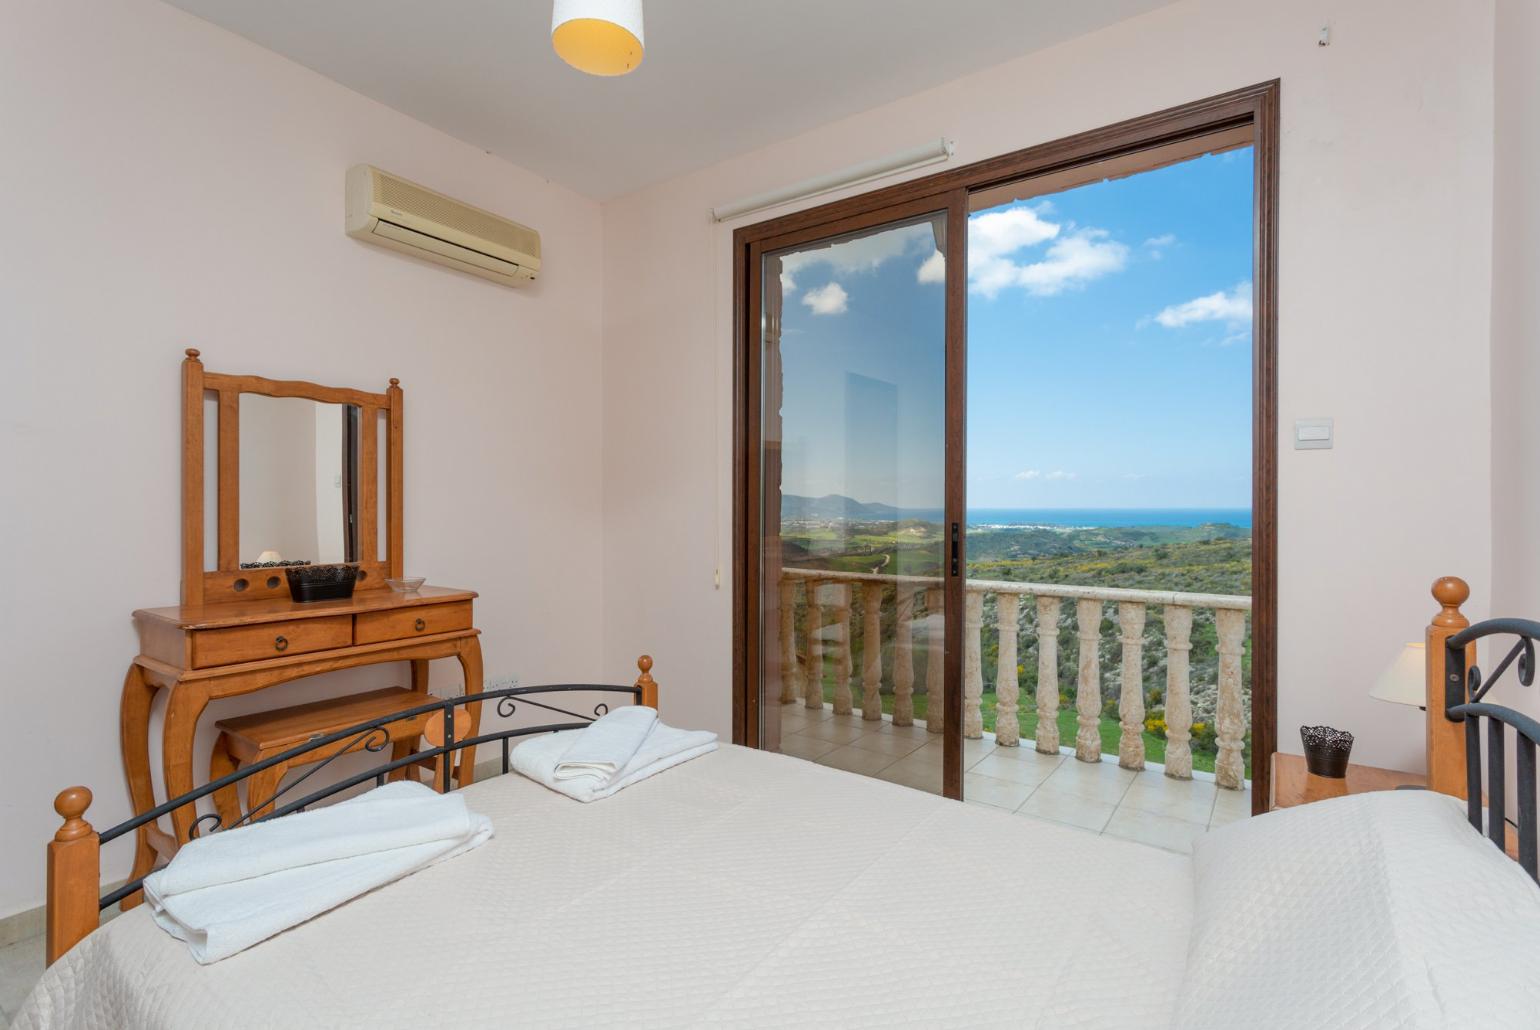 Double bedroom with en suite bathroom, A/C, and balcony access with views of sea and countryside